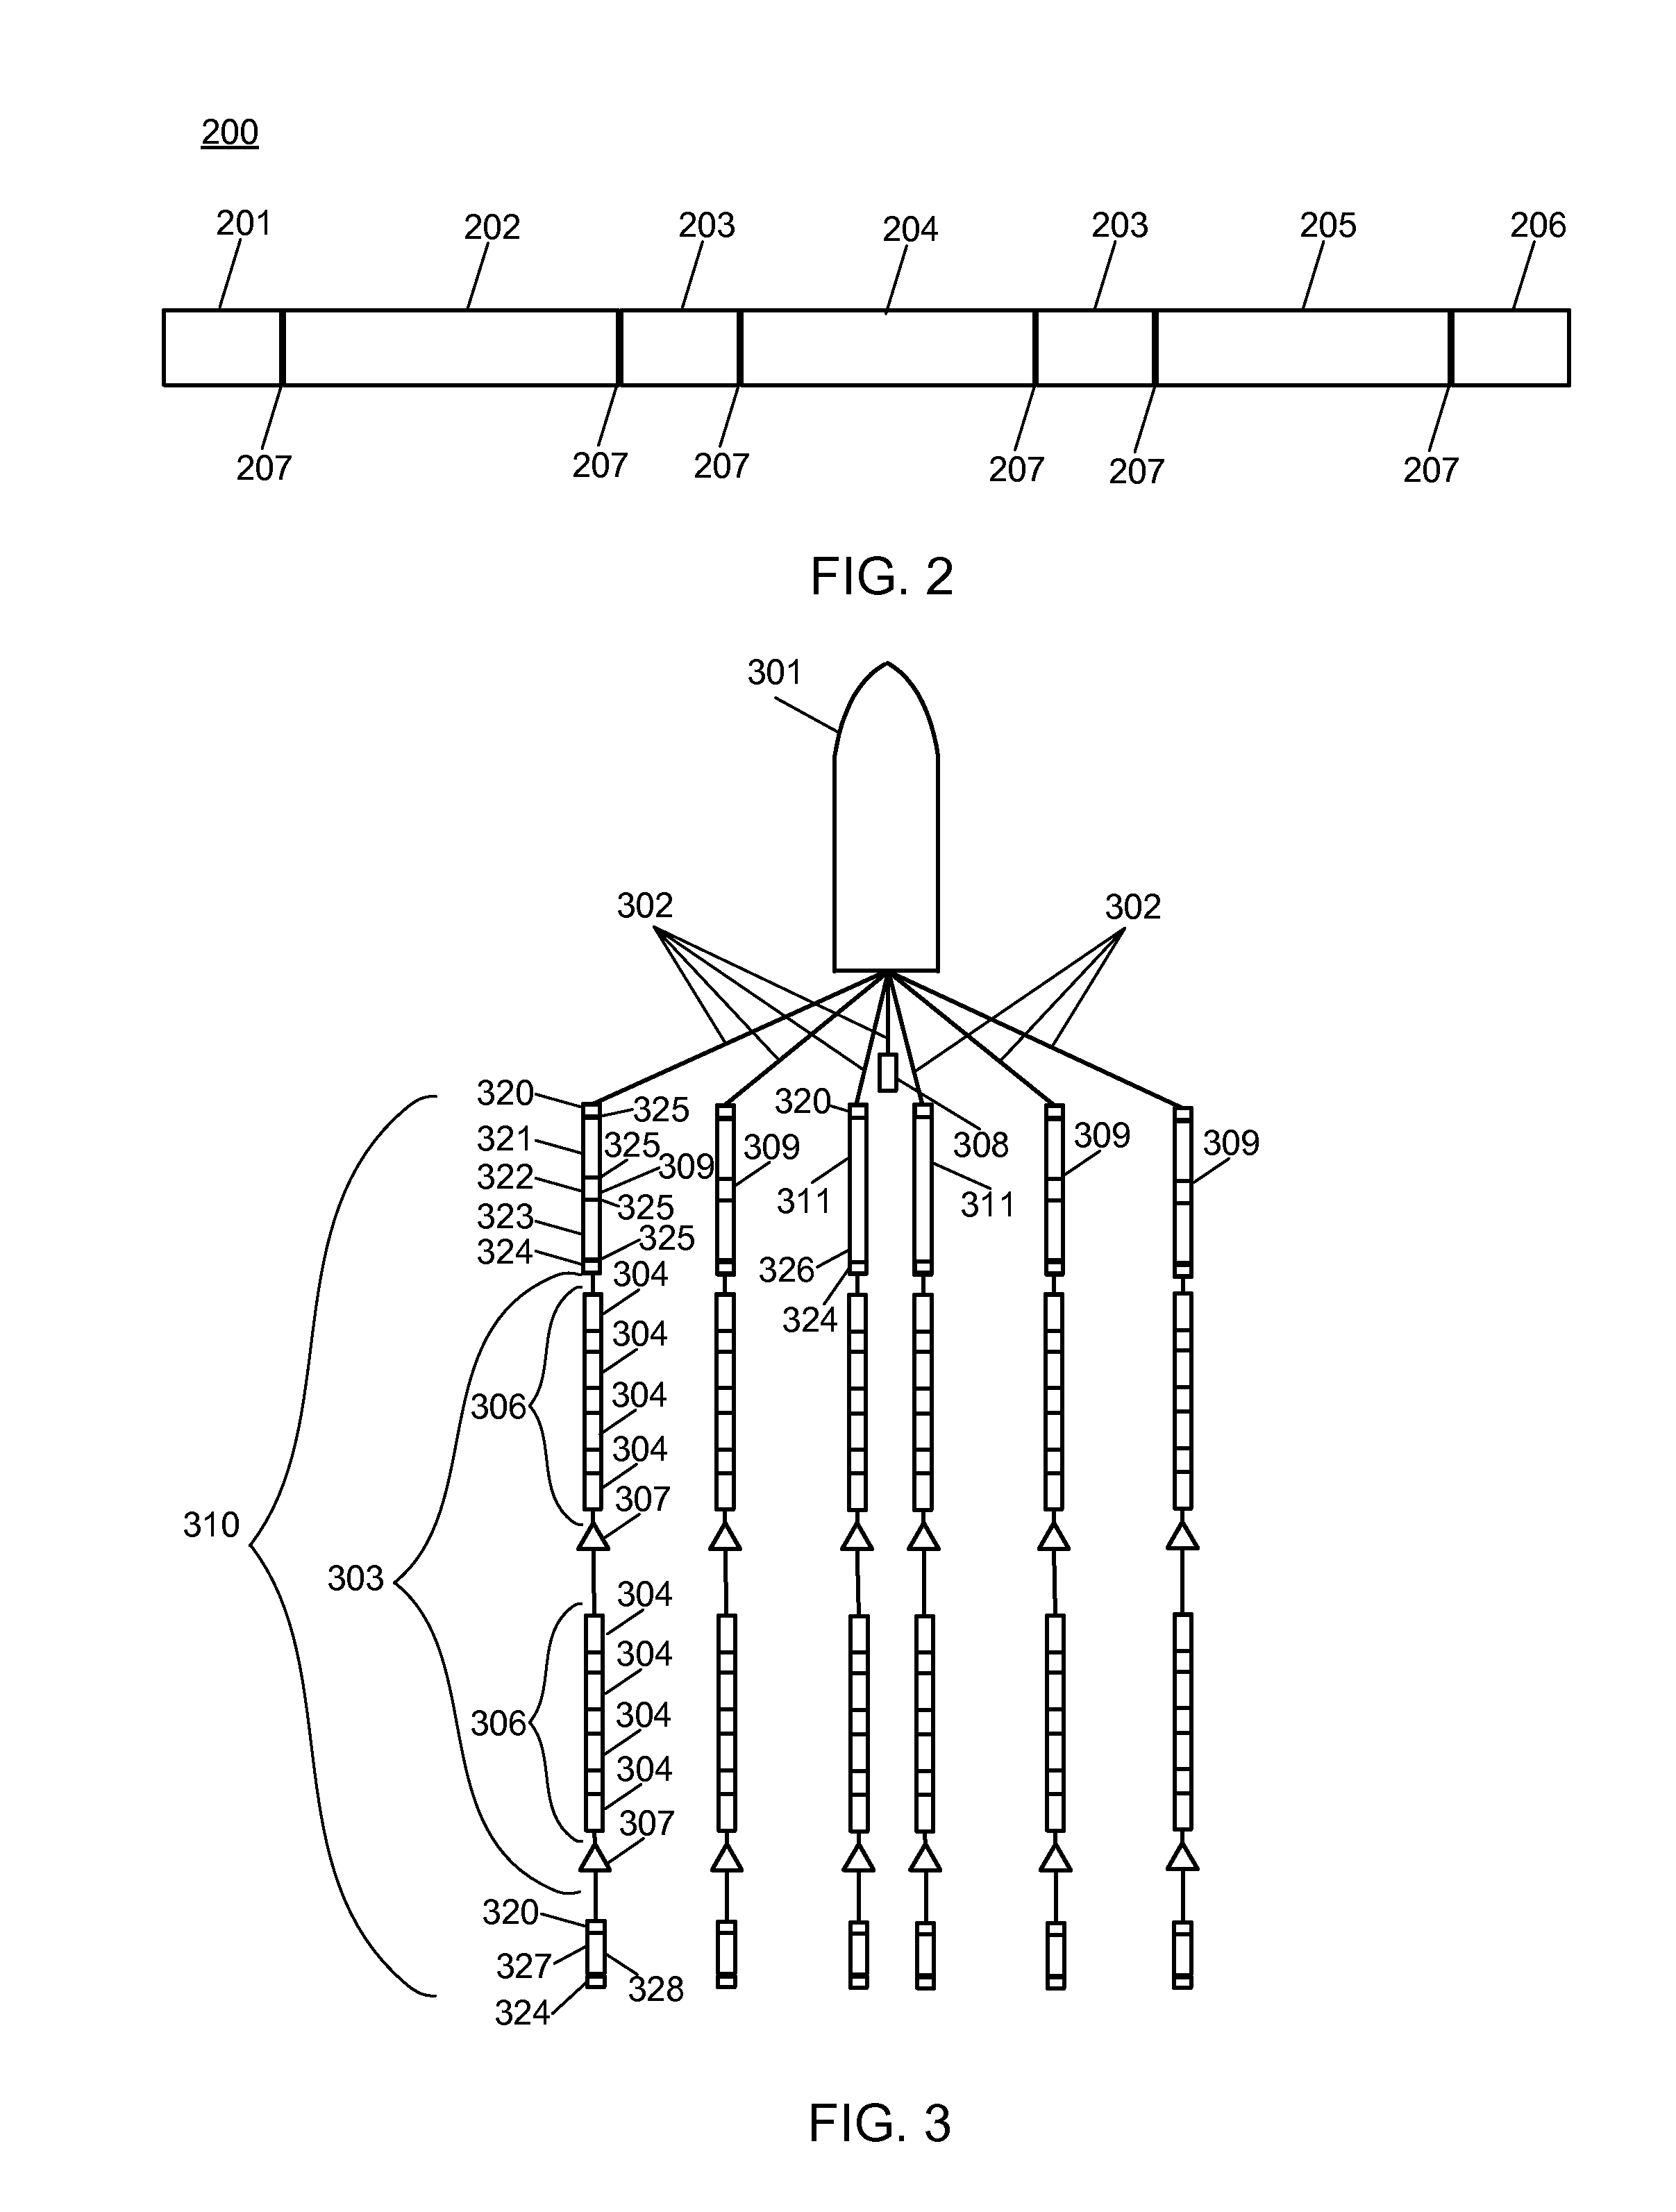 Apparatus and method for vibration mitigation through sequential impedance optimization